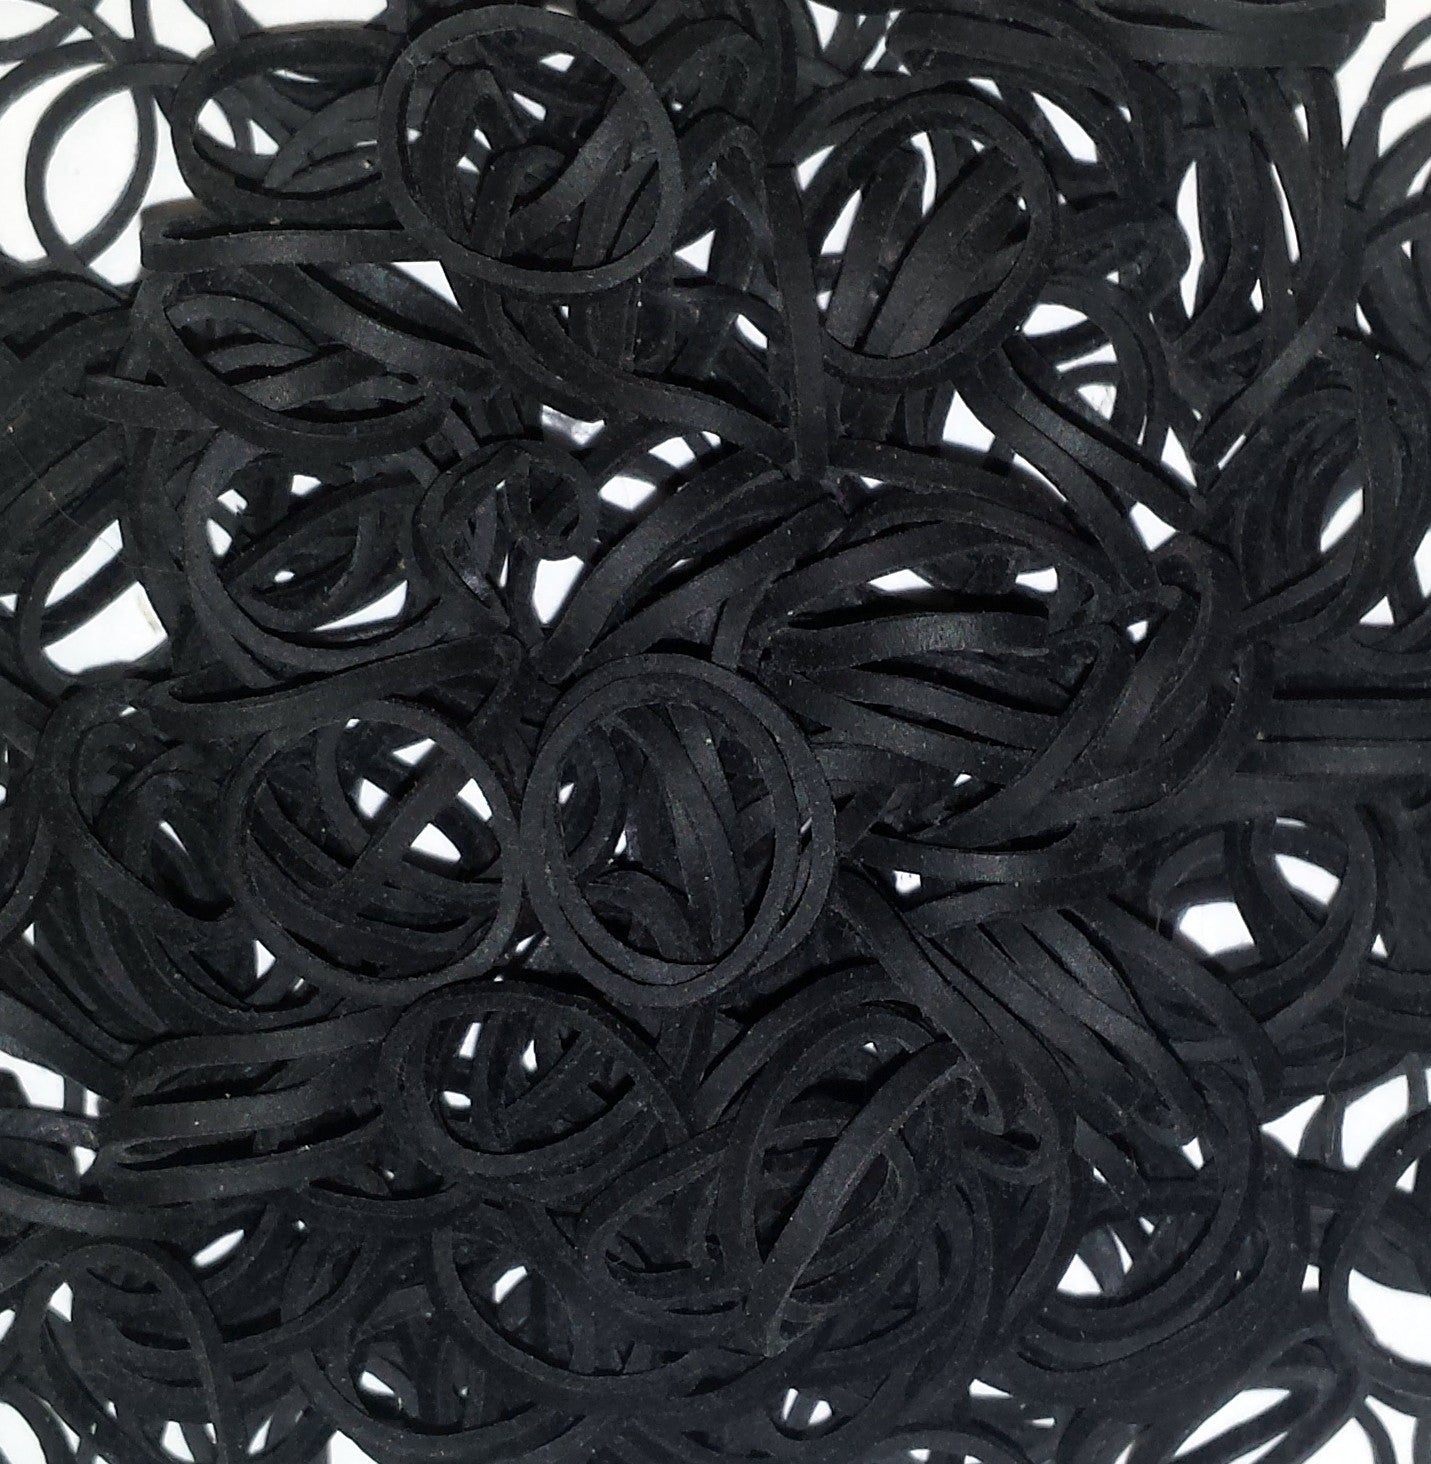 Large Rubber Bands Big Rubber Bands Giant Rubber Bands Elastics Bands Long  Rubber Bands for Office File Rubber Bands